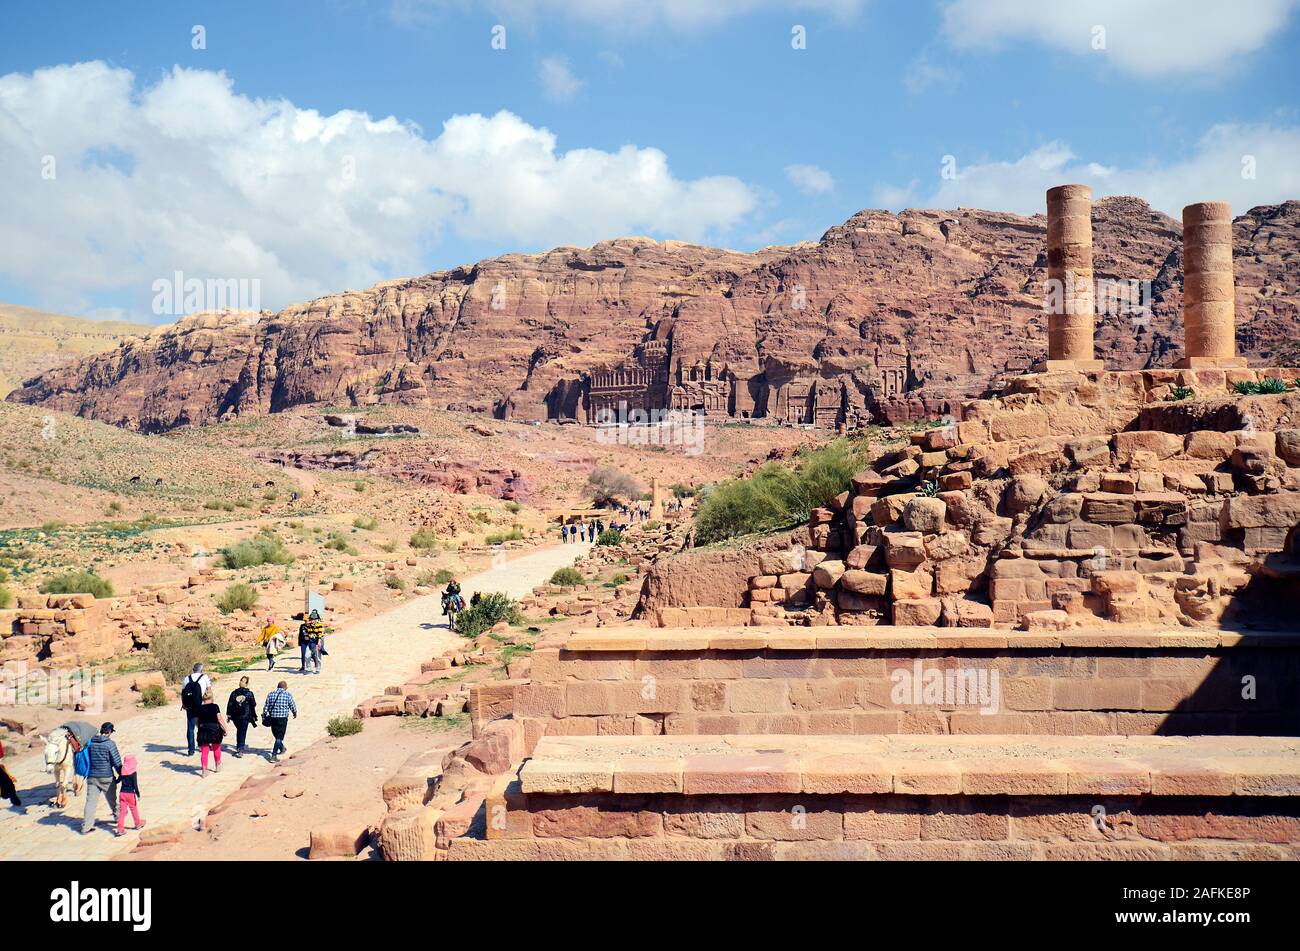 Petra, Jordan - March 06, 2019: Unidentified people at UNESCO World heritage site of ancient Petra Stock Photo